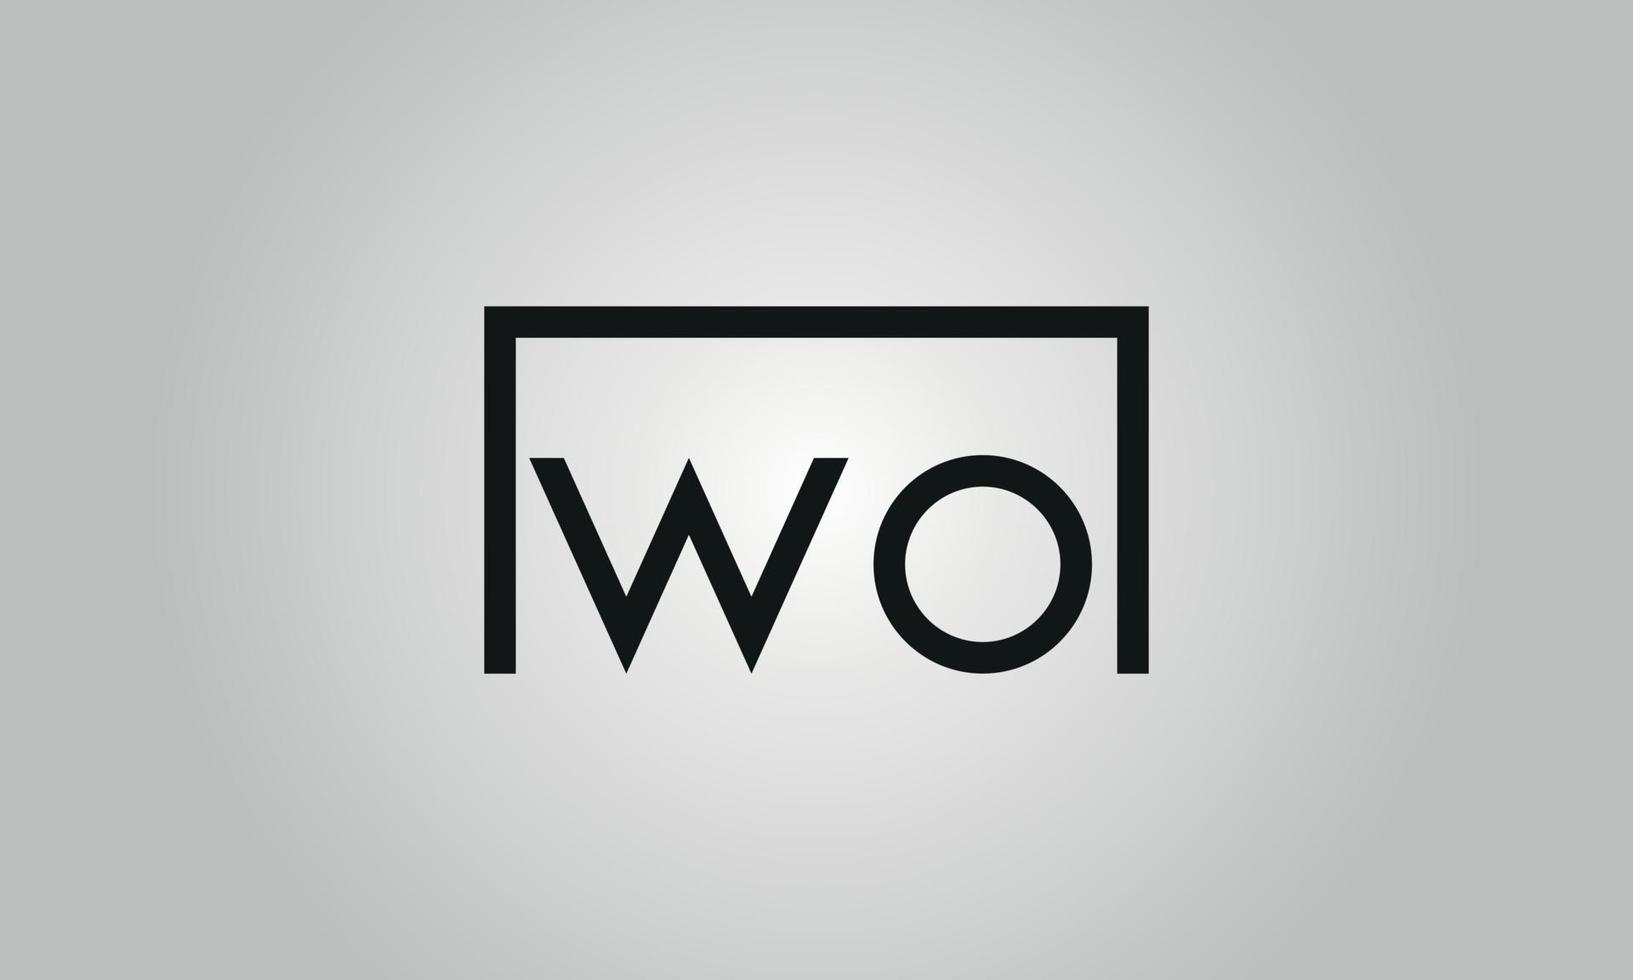 Letter WO logo design. WO logo with square shape in black colors vector free vector template.